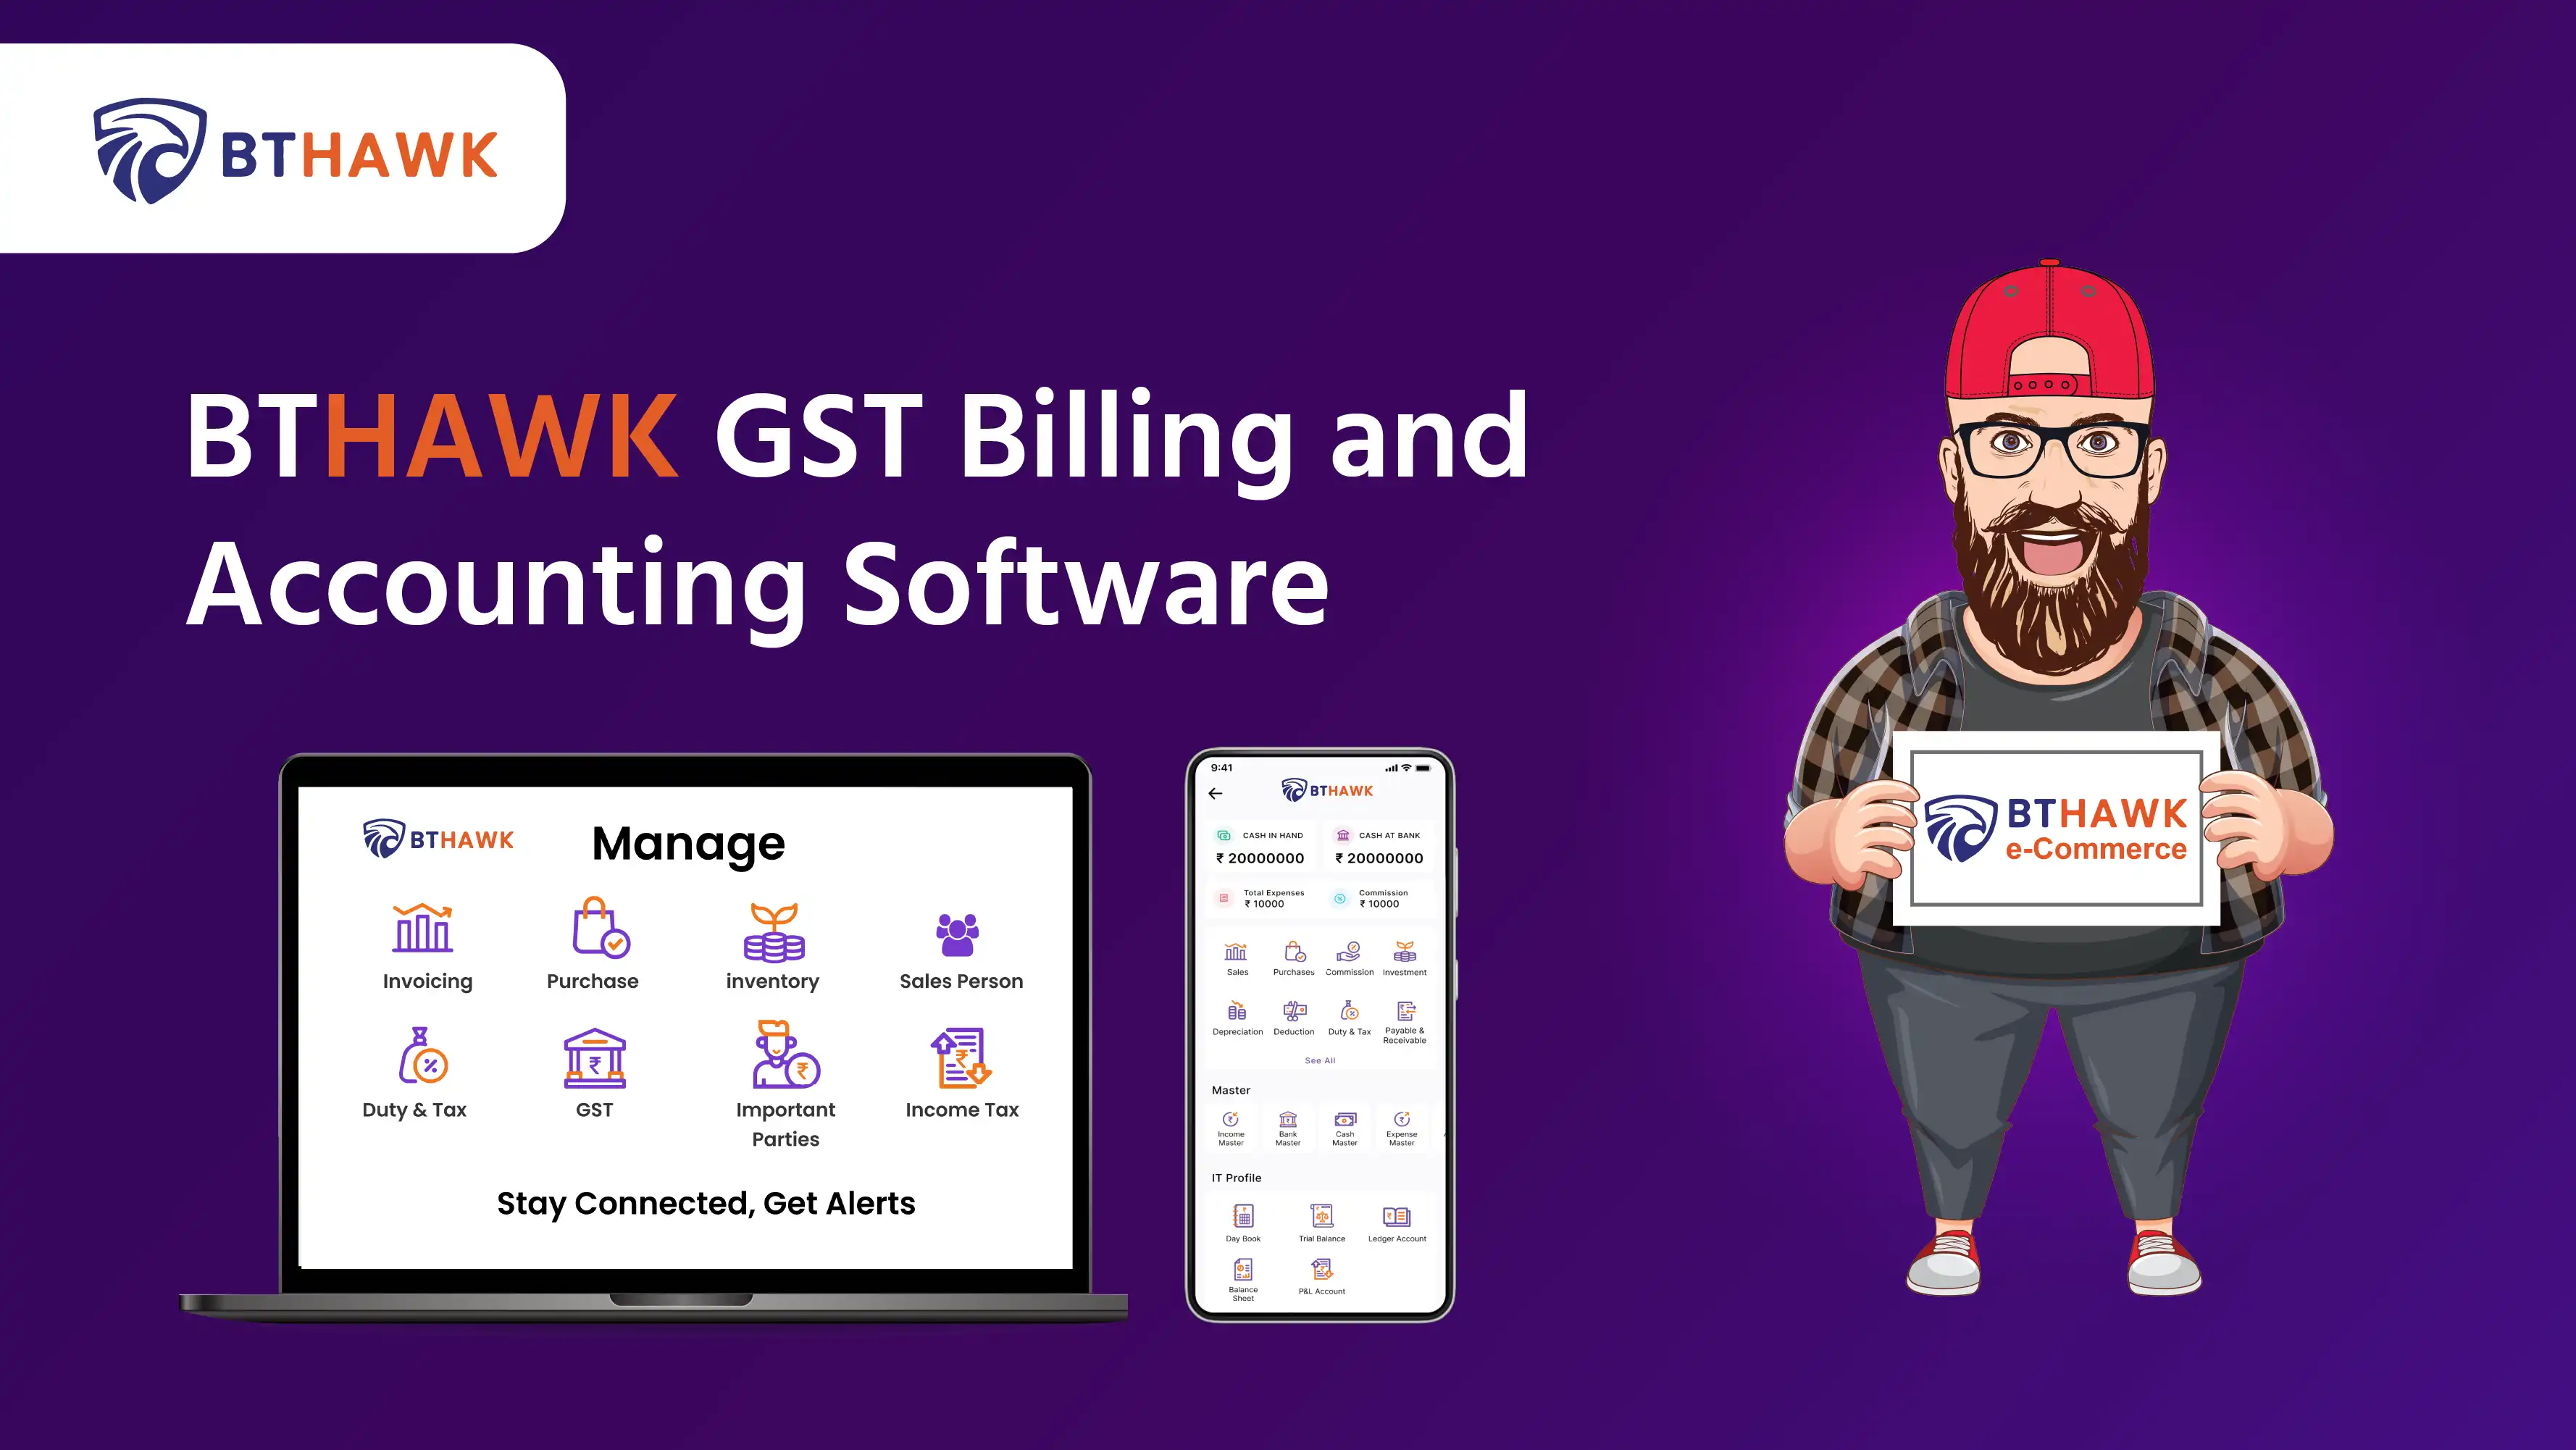 BTHAWK GST Billing and Accounting Software